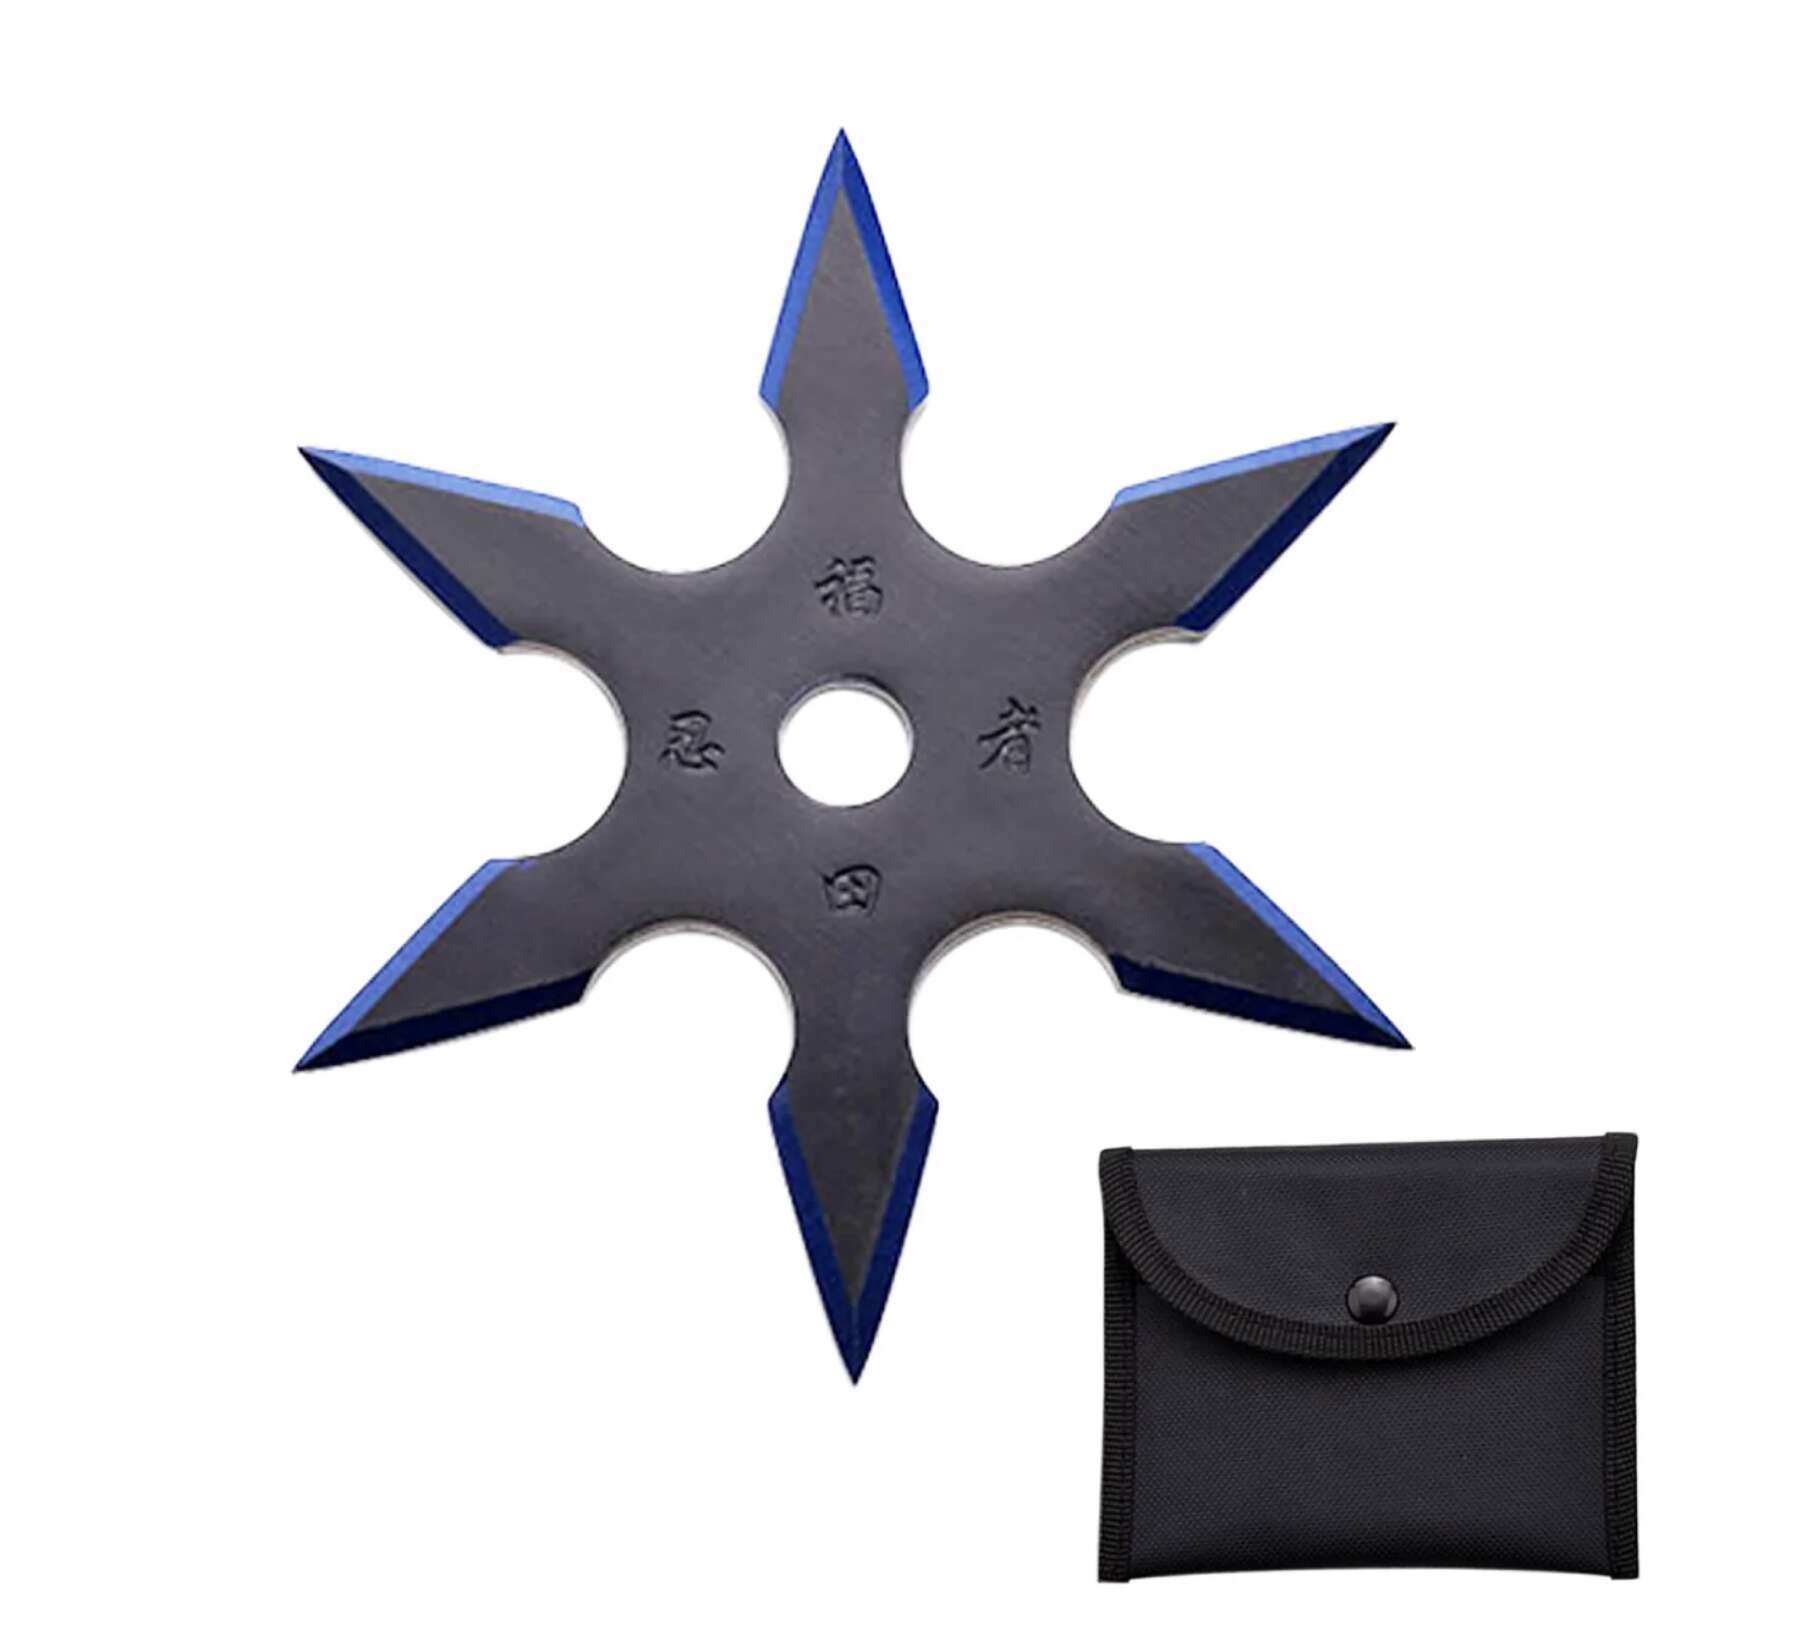 4-INCH 6 Points Throwing Star with Pouch